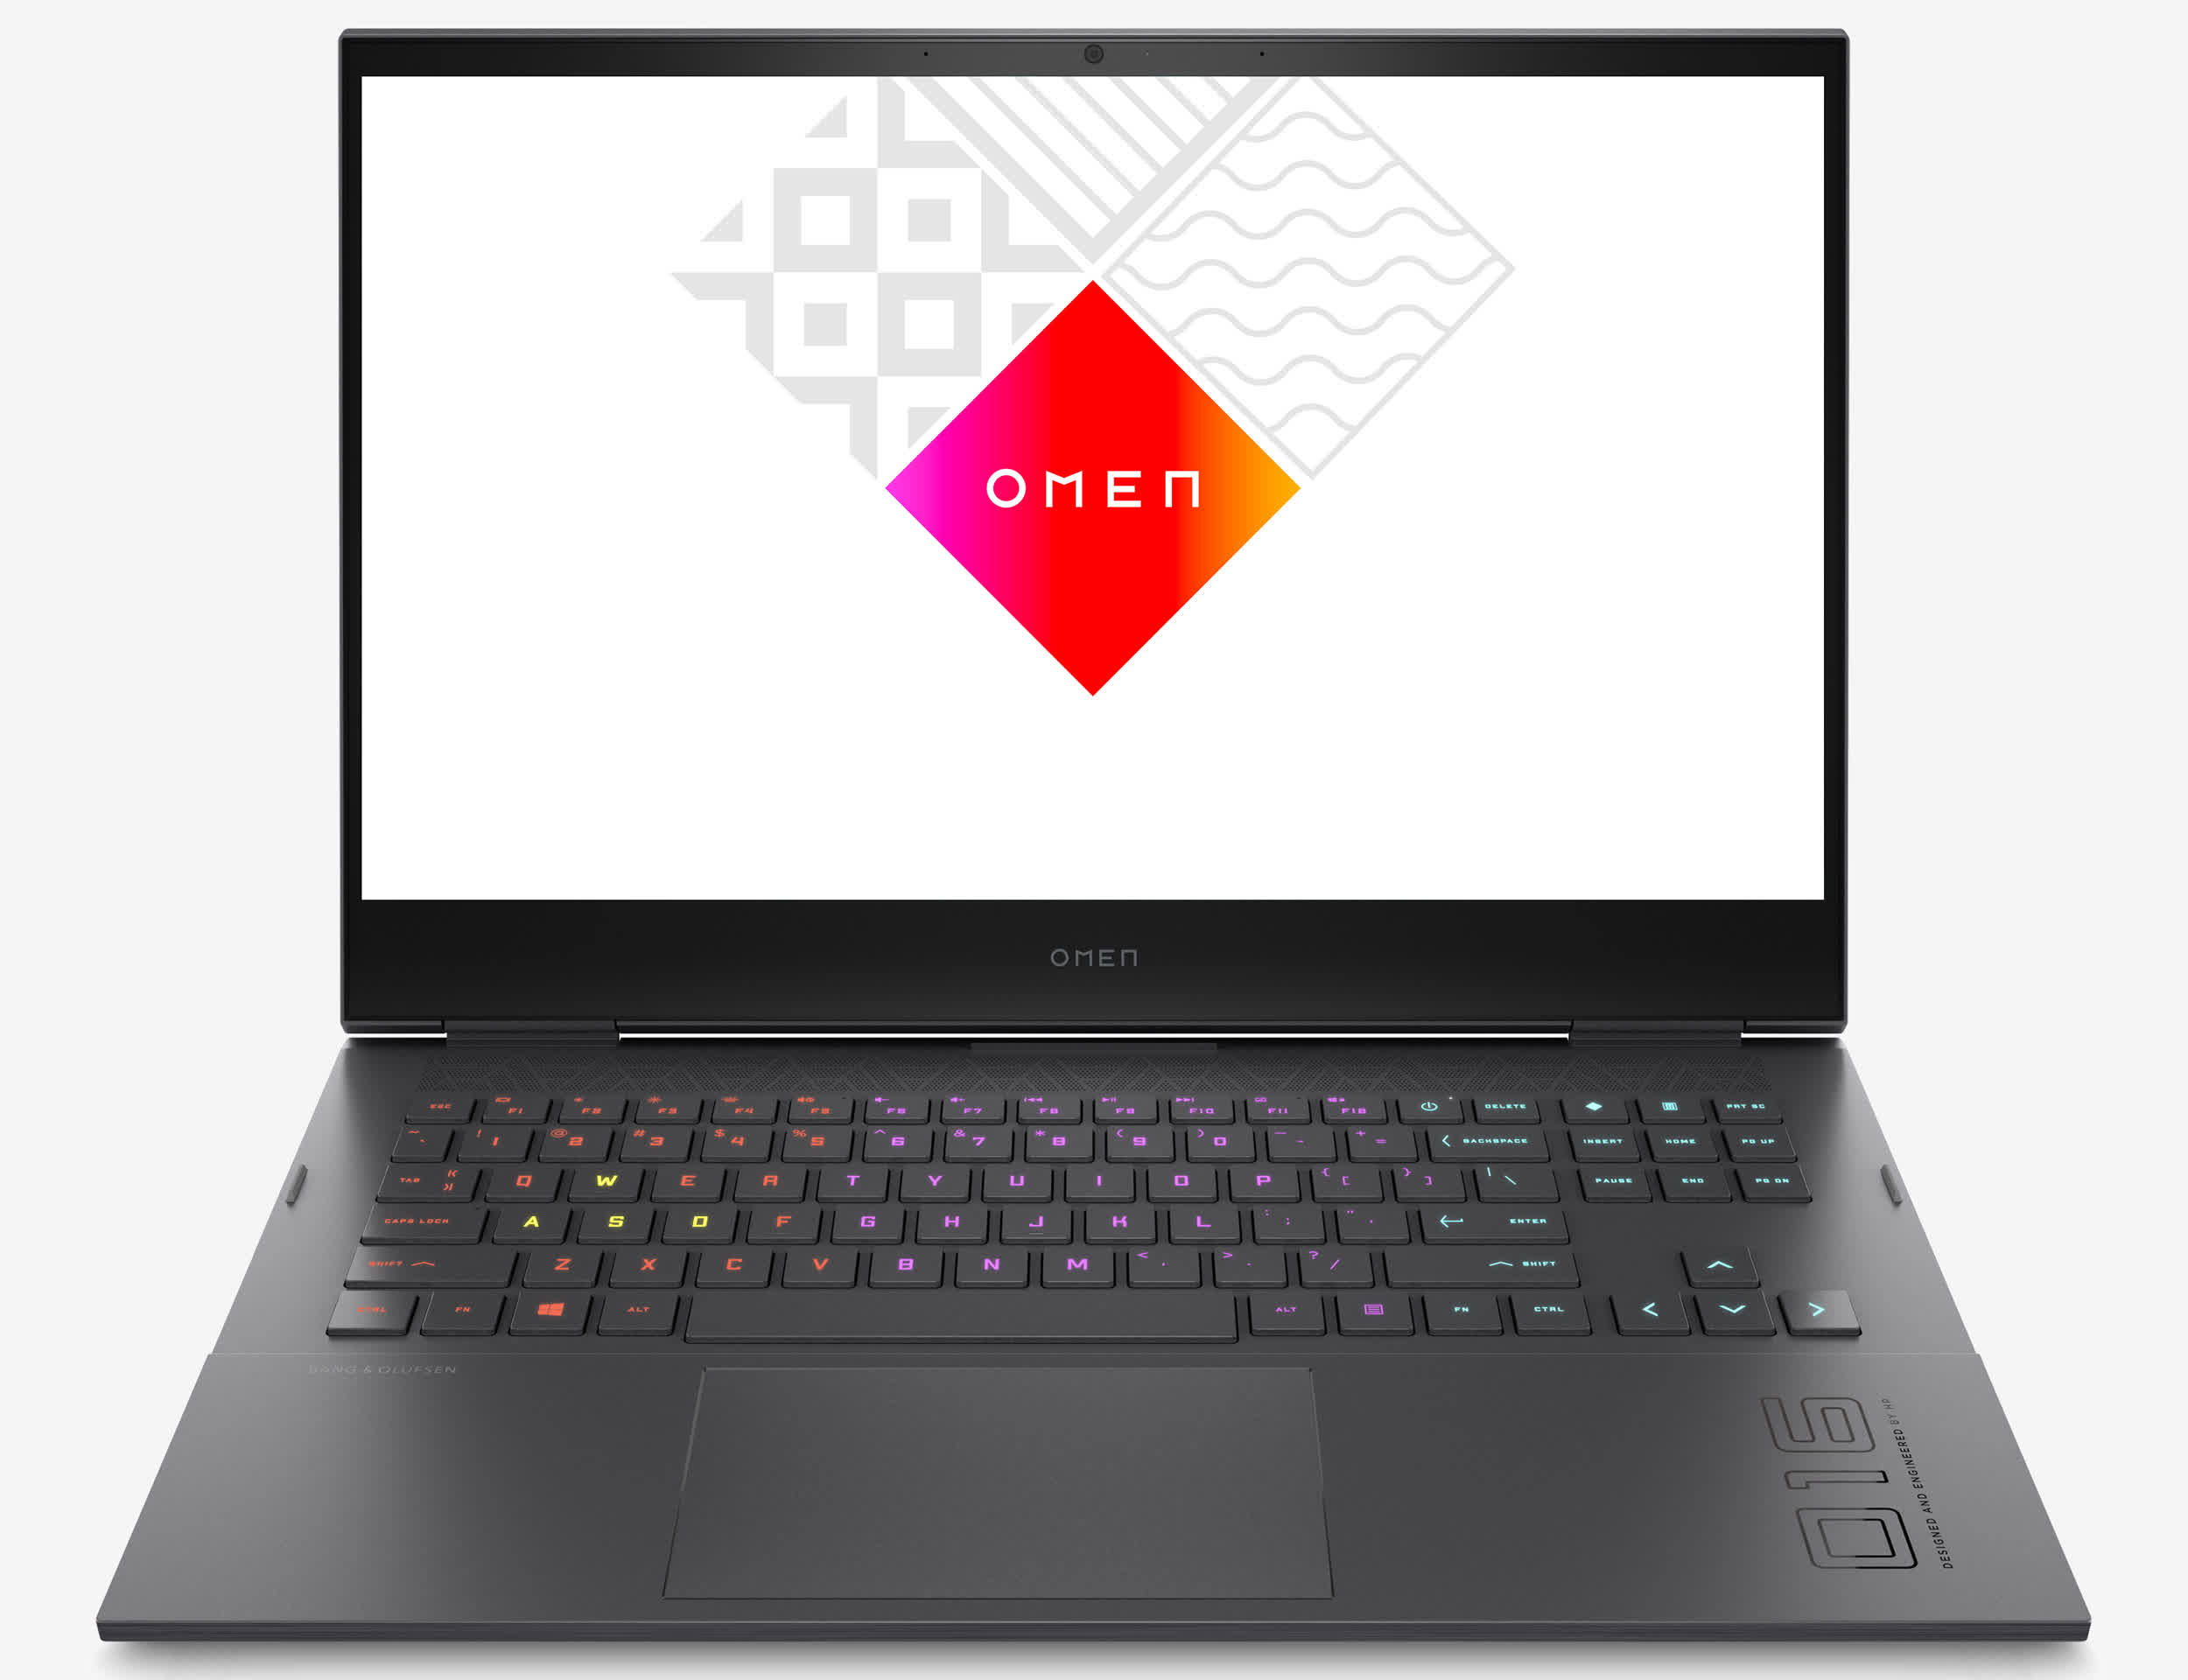 HP introduces new Omen gaming laptops, and the new Victus brand